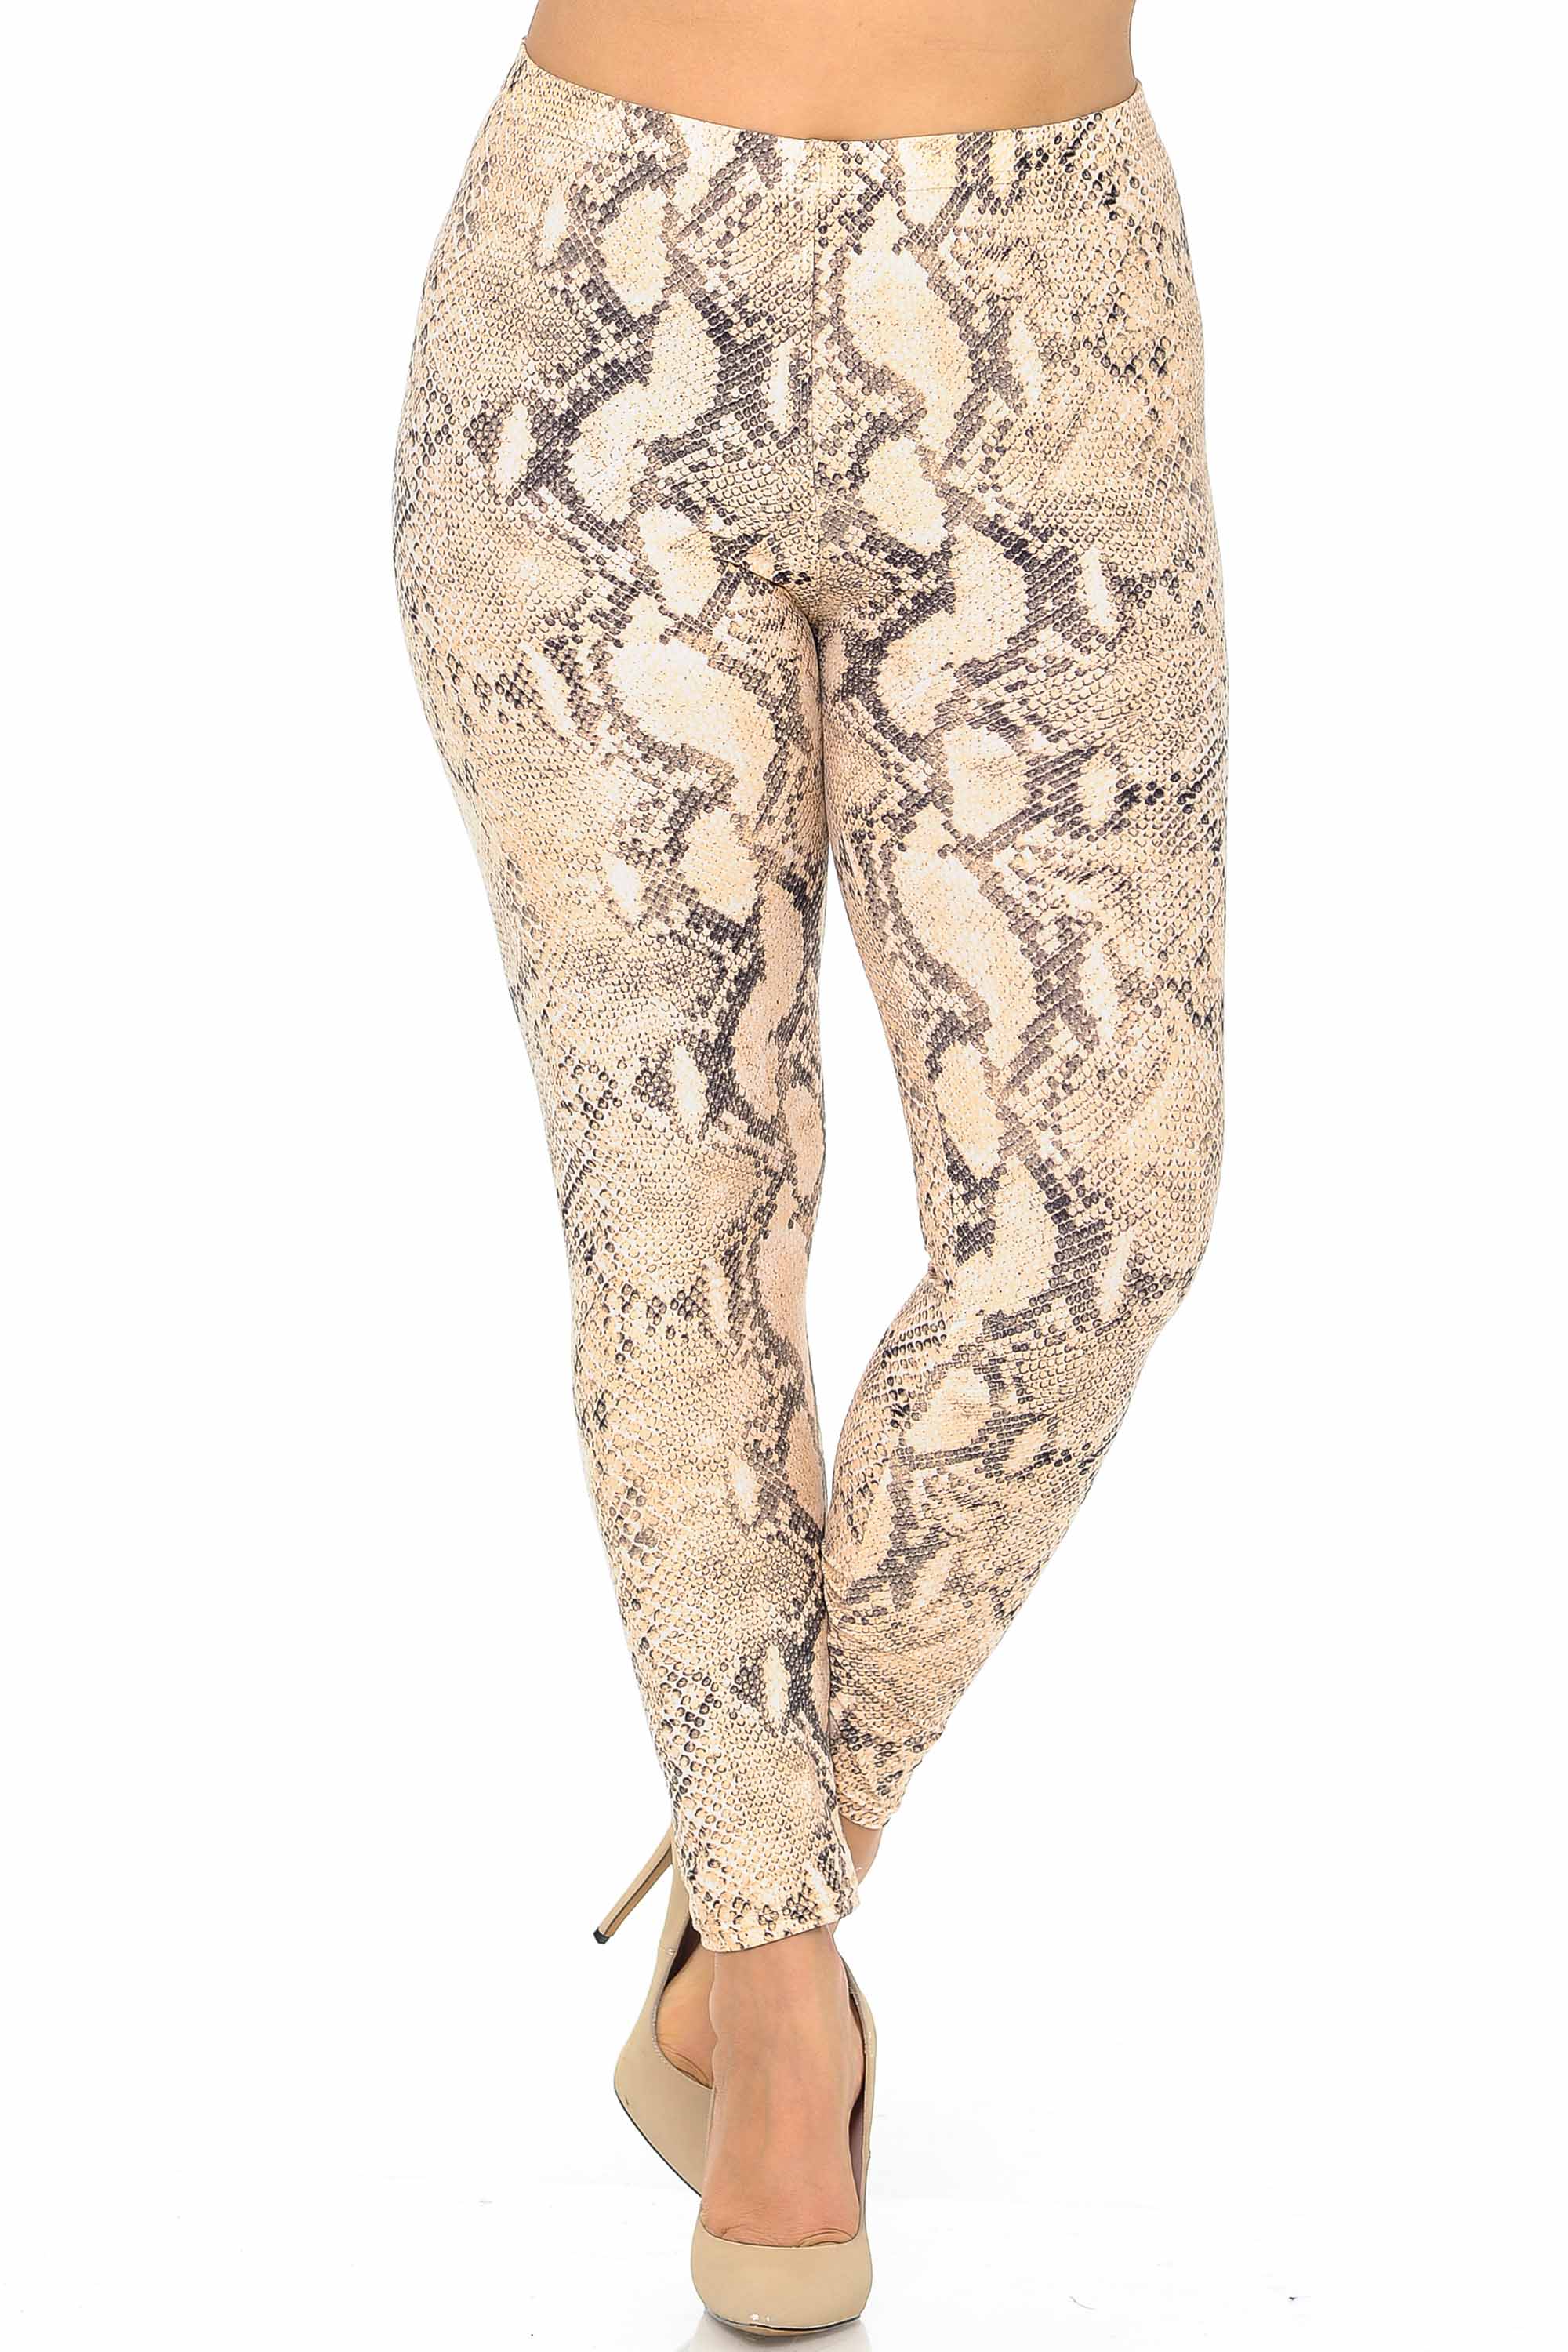 Wholesale Buttery Smooth Cream Snakeskin Extra Plus Size Leggings - 3X-5X